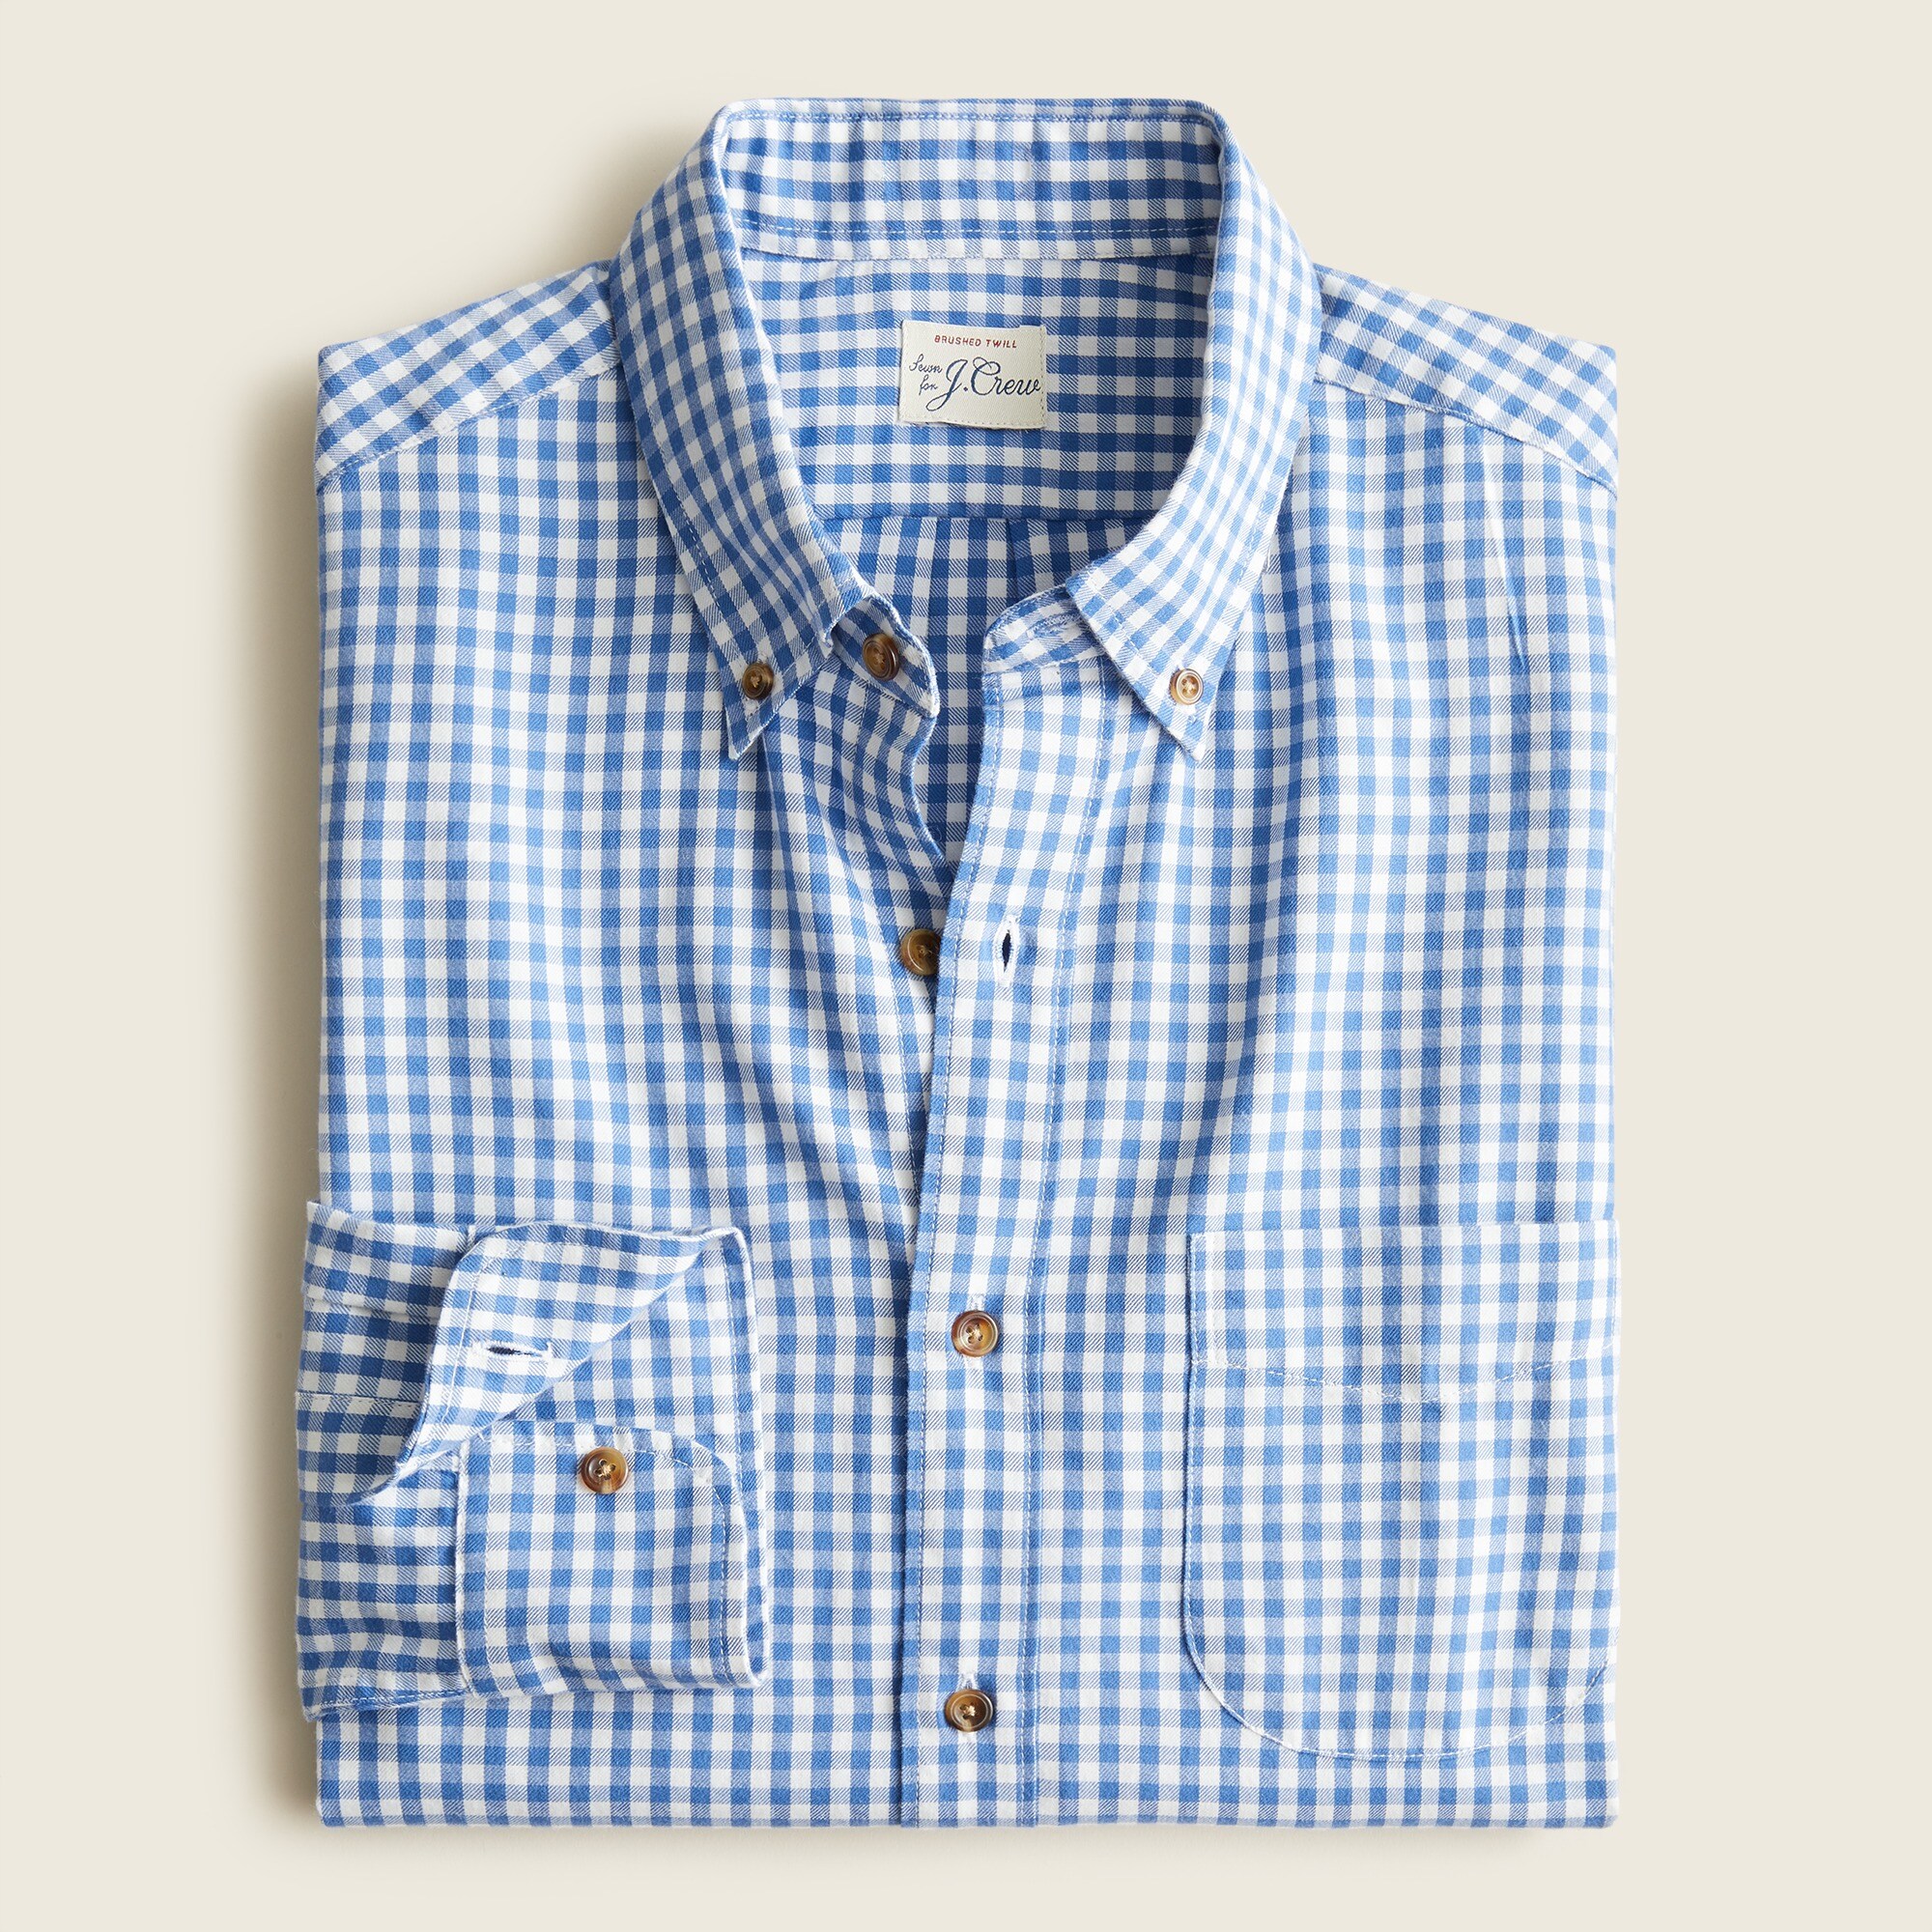 Jcrew Brushed twill shirt in plaid